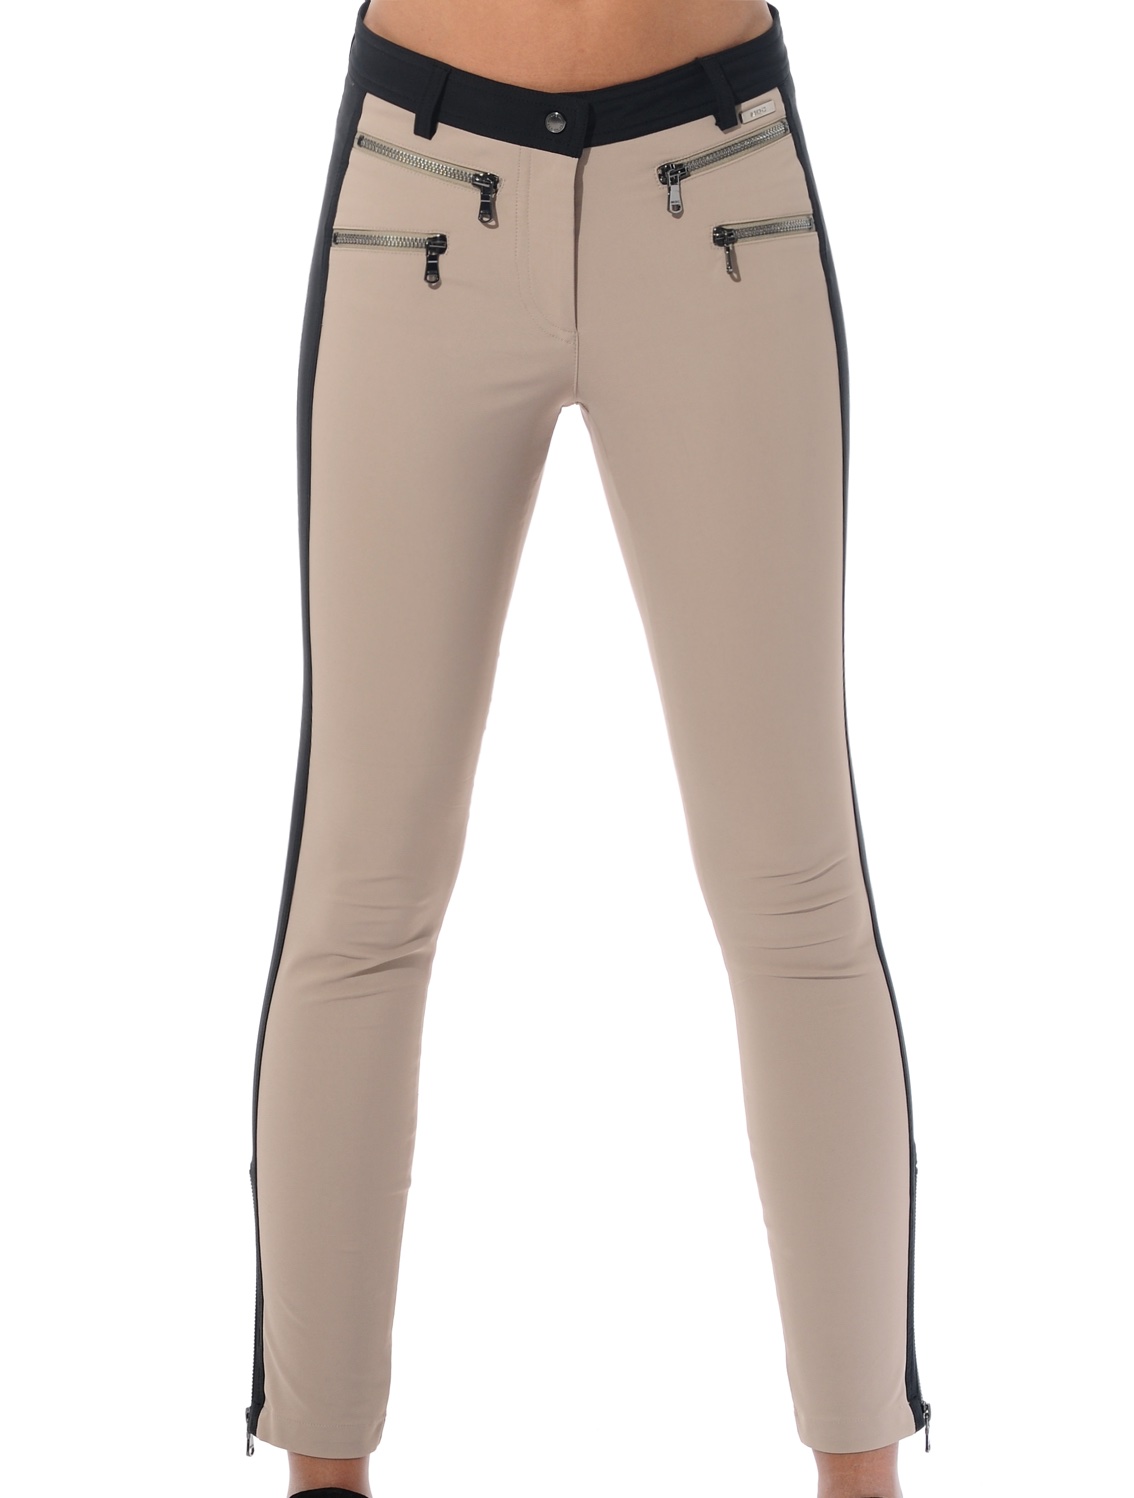 4way stretch double zip ankle pants taupe/black 